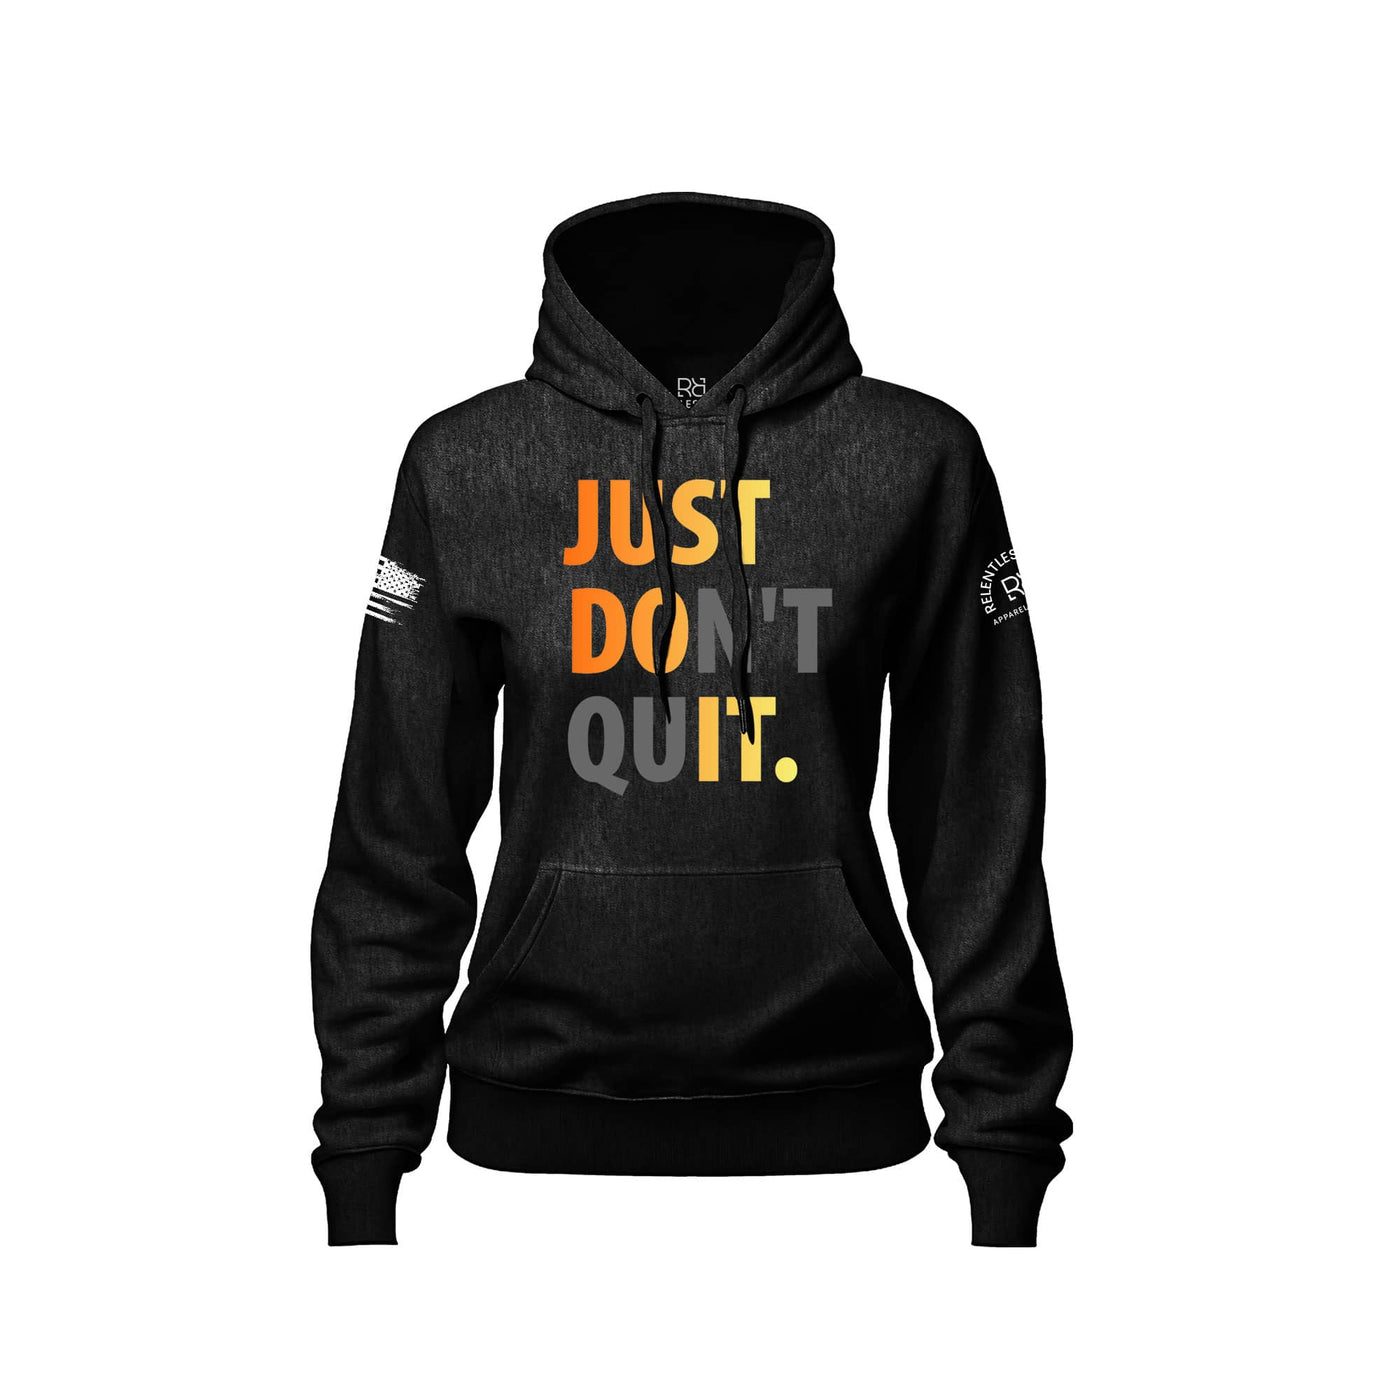 Solid Black Women's Just Don't Quit Front Design Hoodie